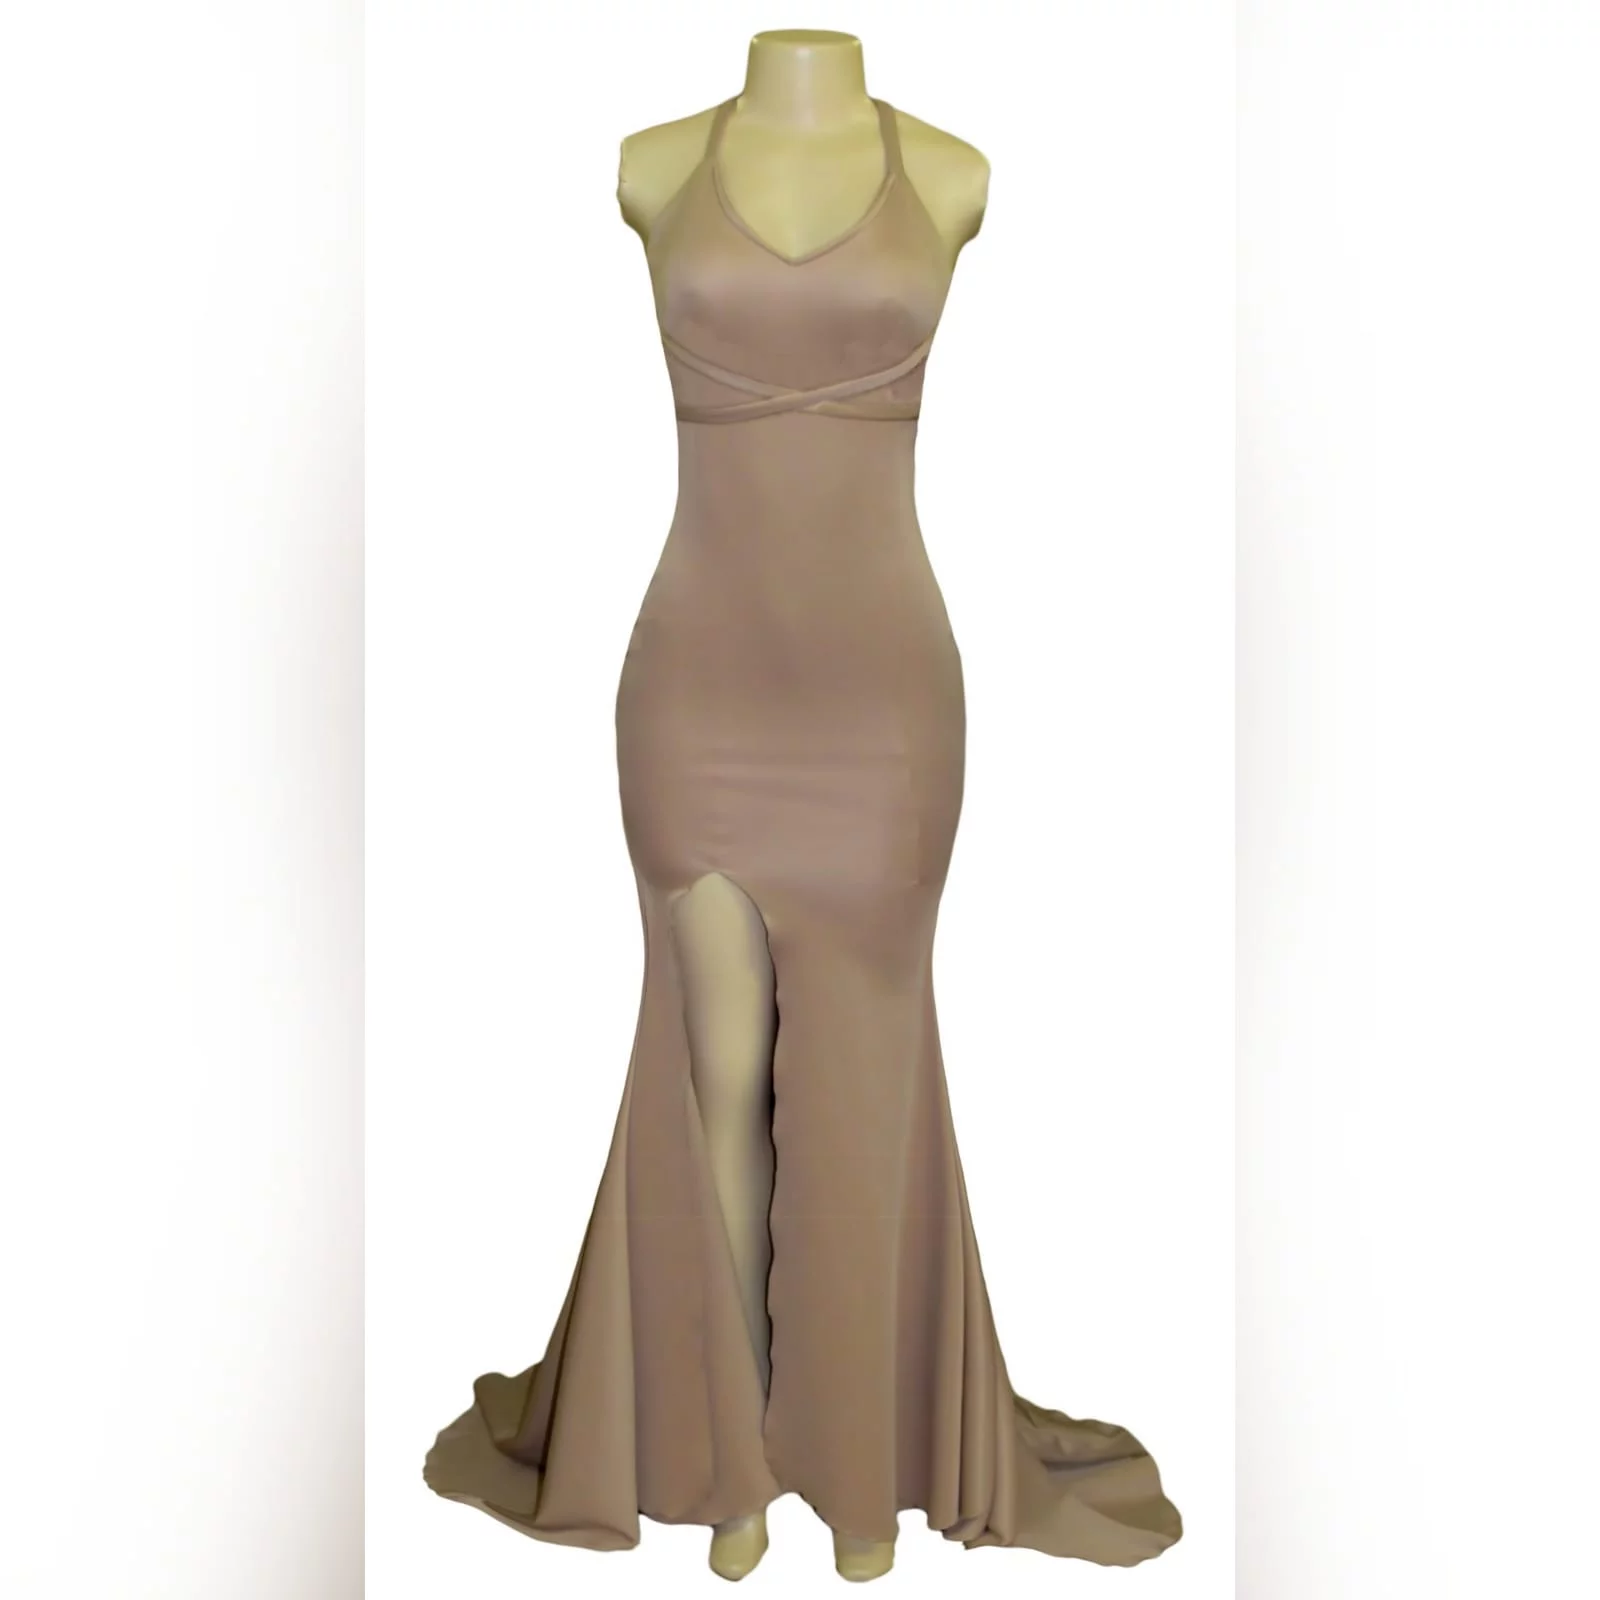 Tan sexy soft mermaid matric dance dress 6 tan sexy soft mermaid matric farewell dress with a naked back detailed with straps, with a slit and a long train.